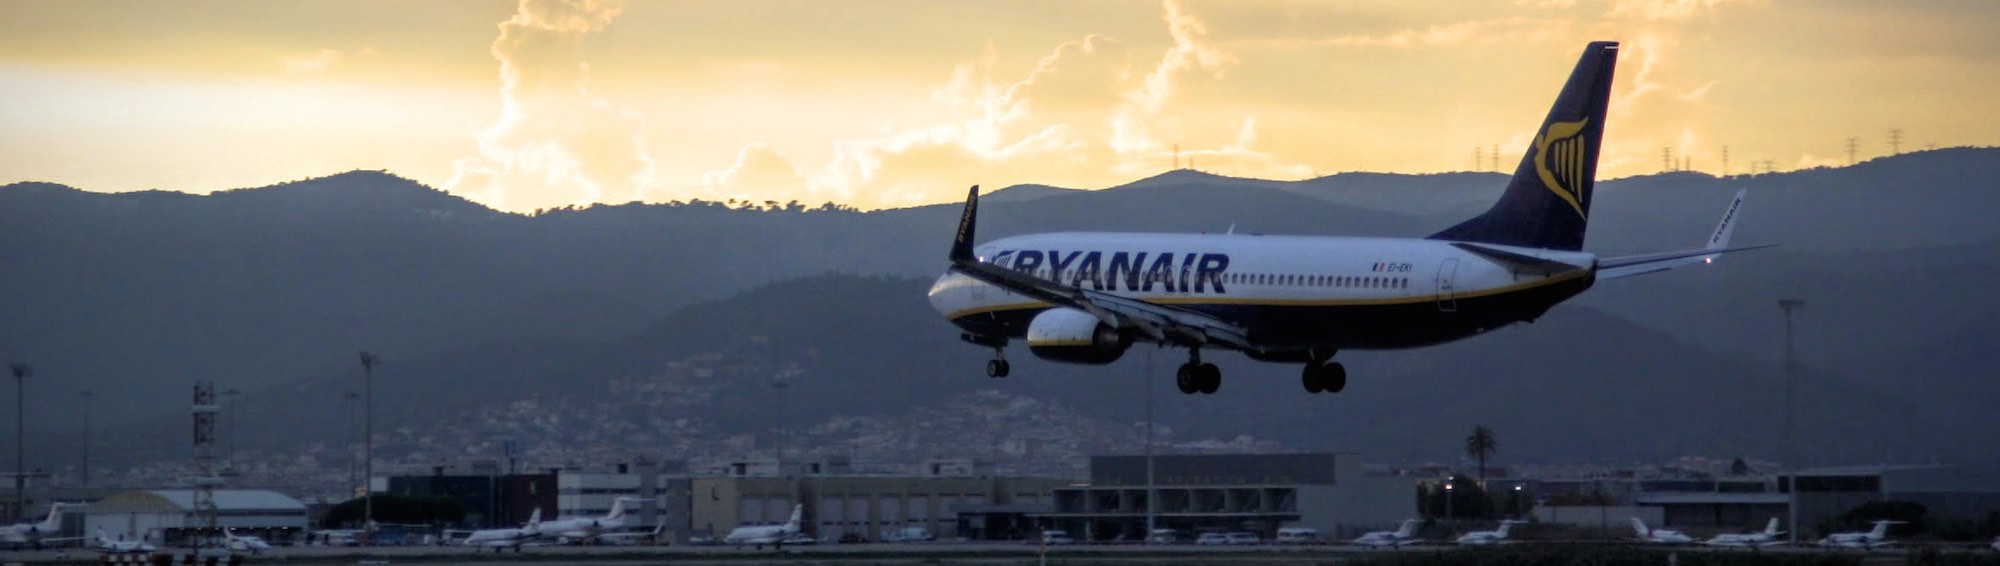 Best time to book flights for Bergamo (BGY) to Weeze (NRN) flights with Ryanair at AirHint